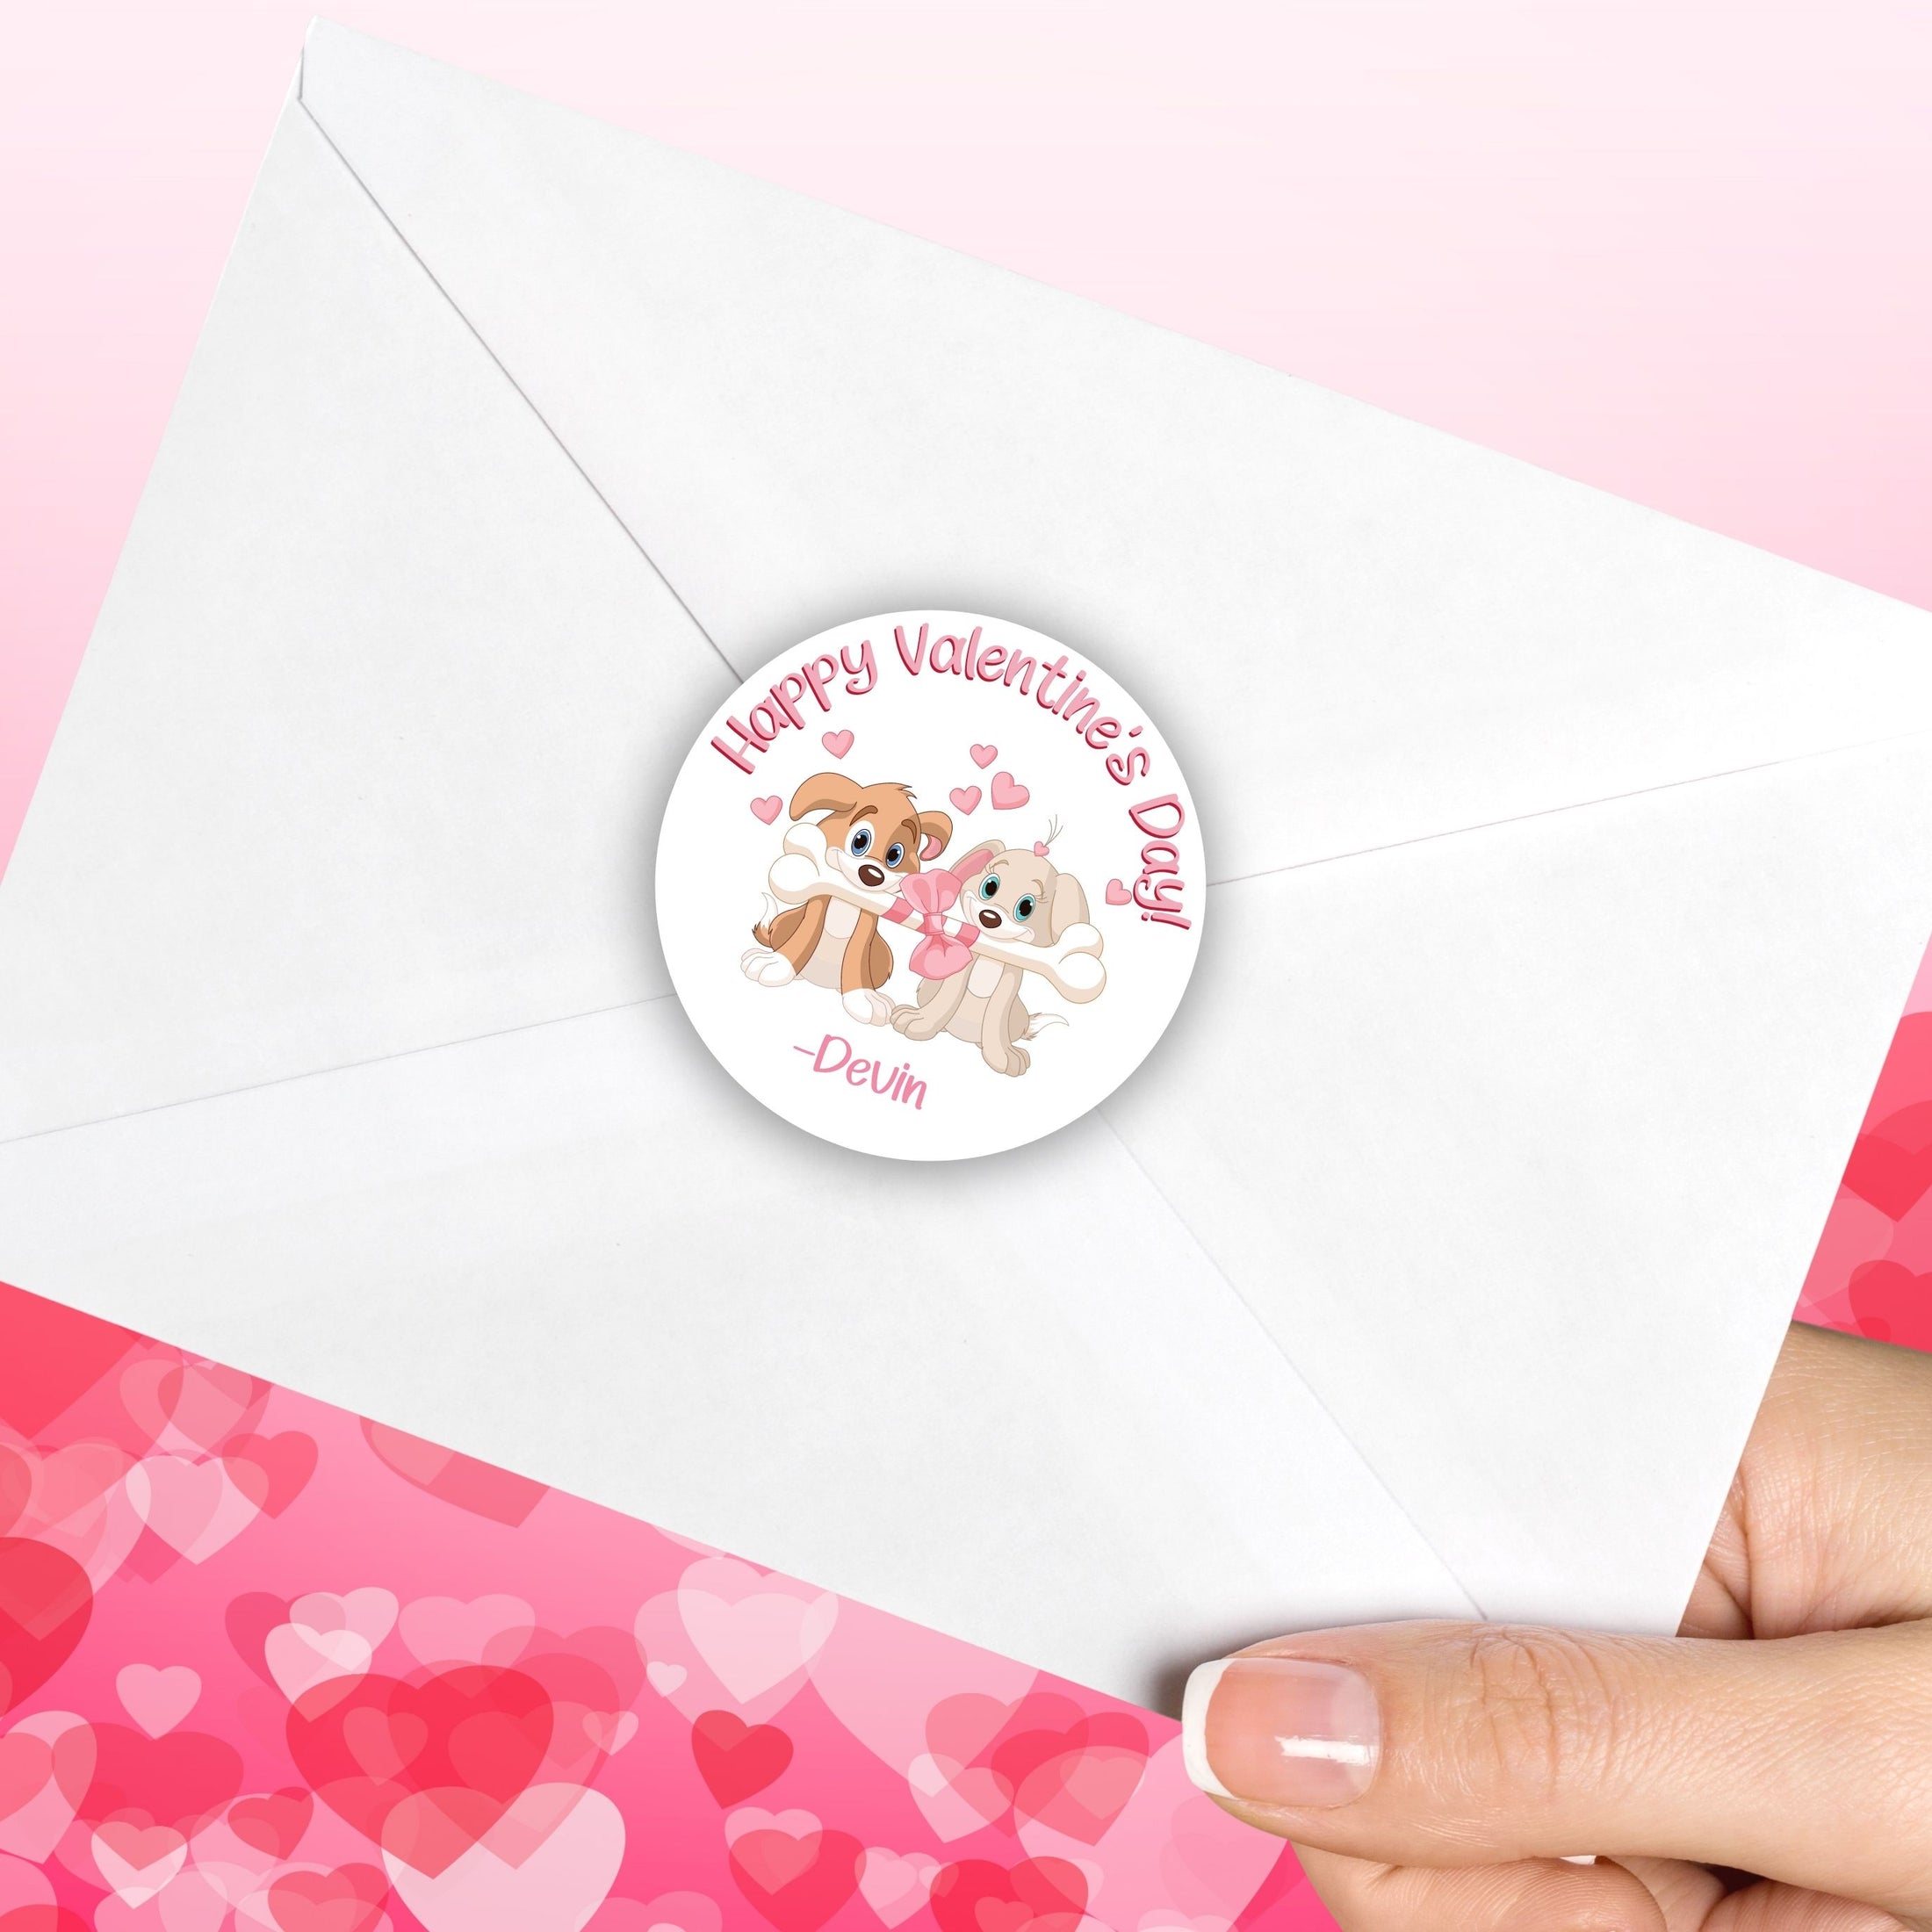 This image shows the personalized valentine sticker on the back of an envelope.